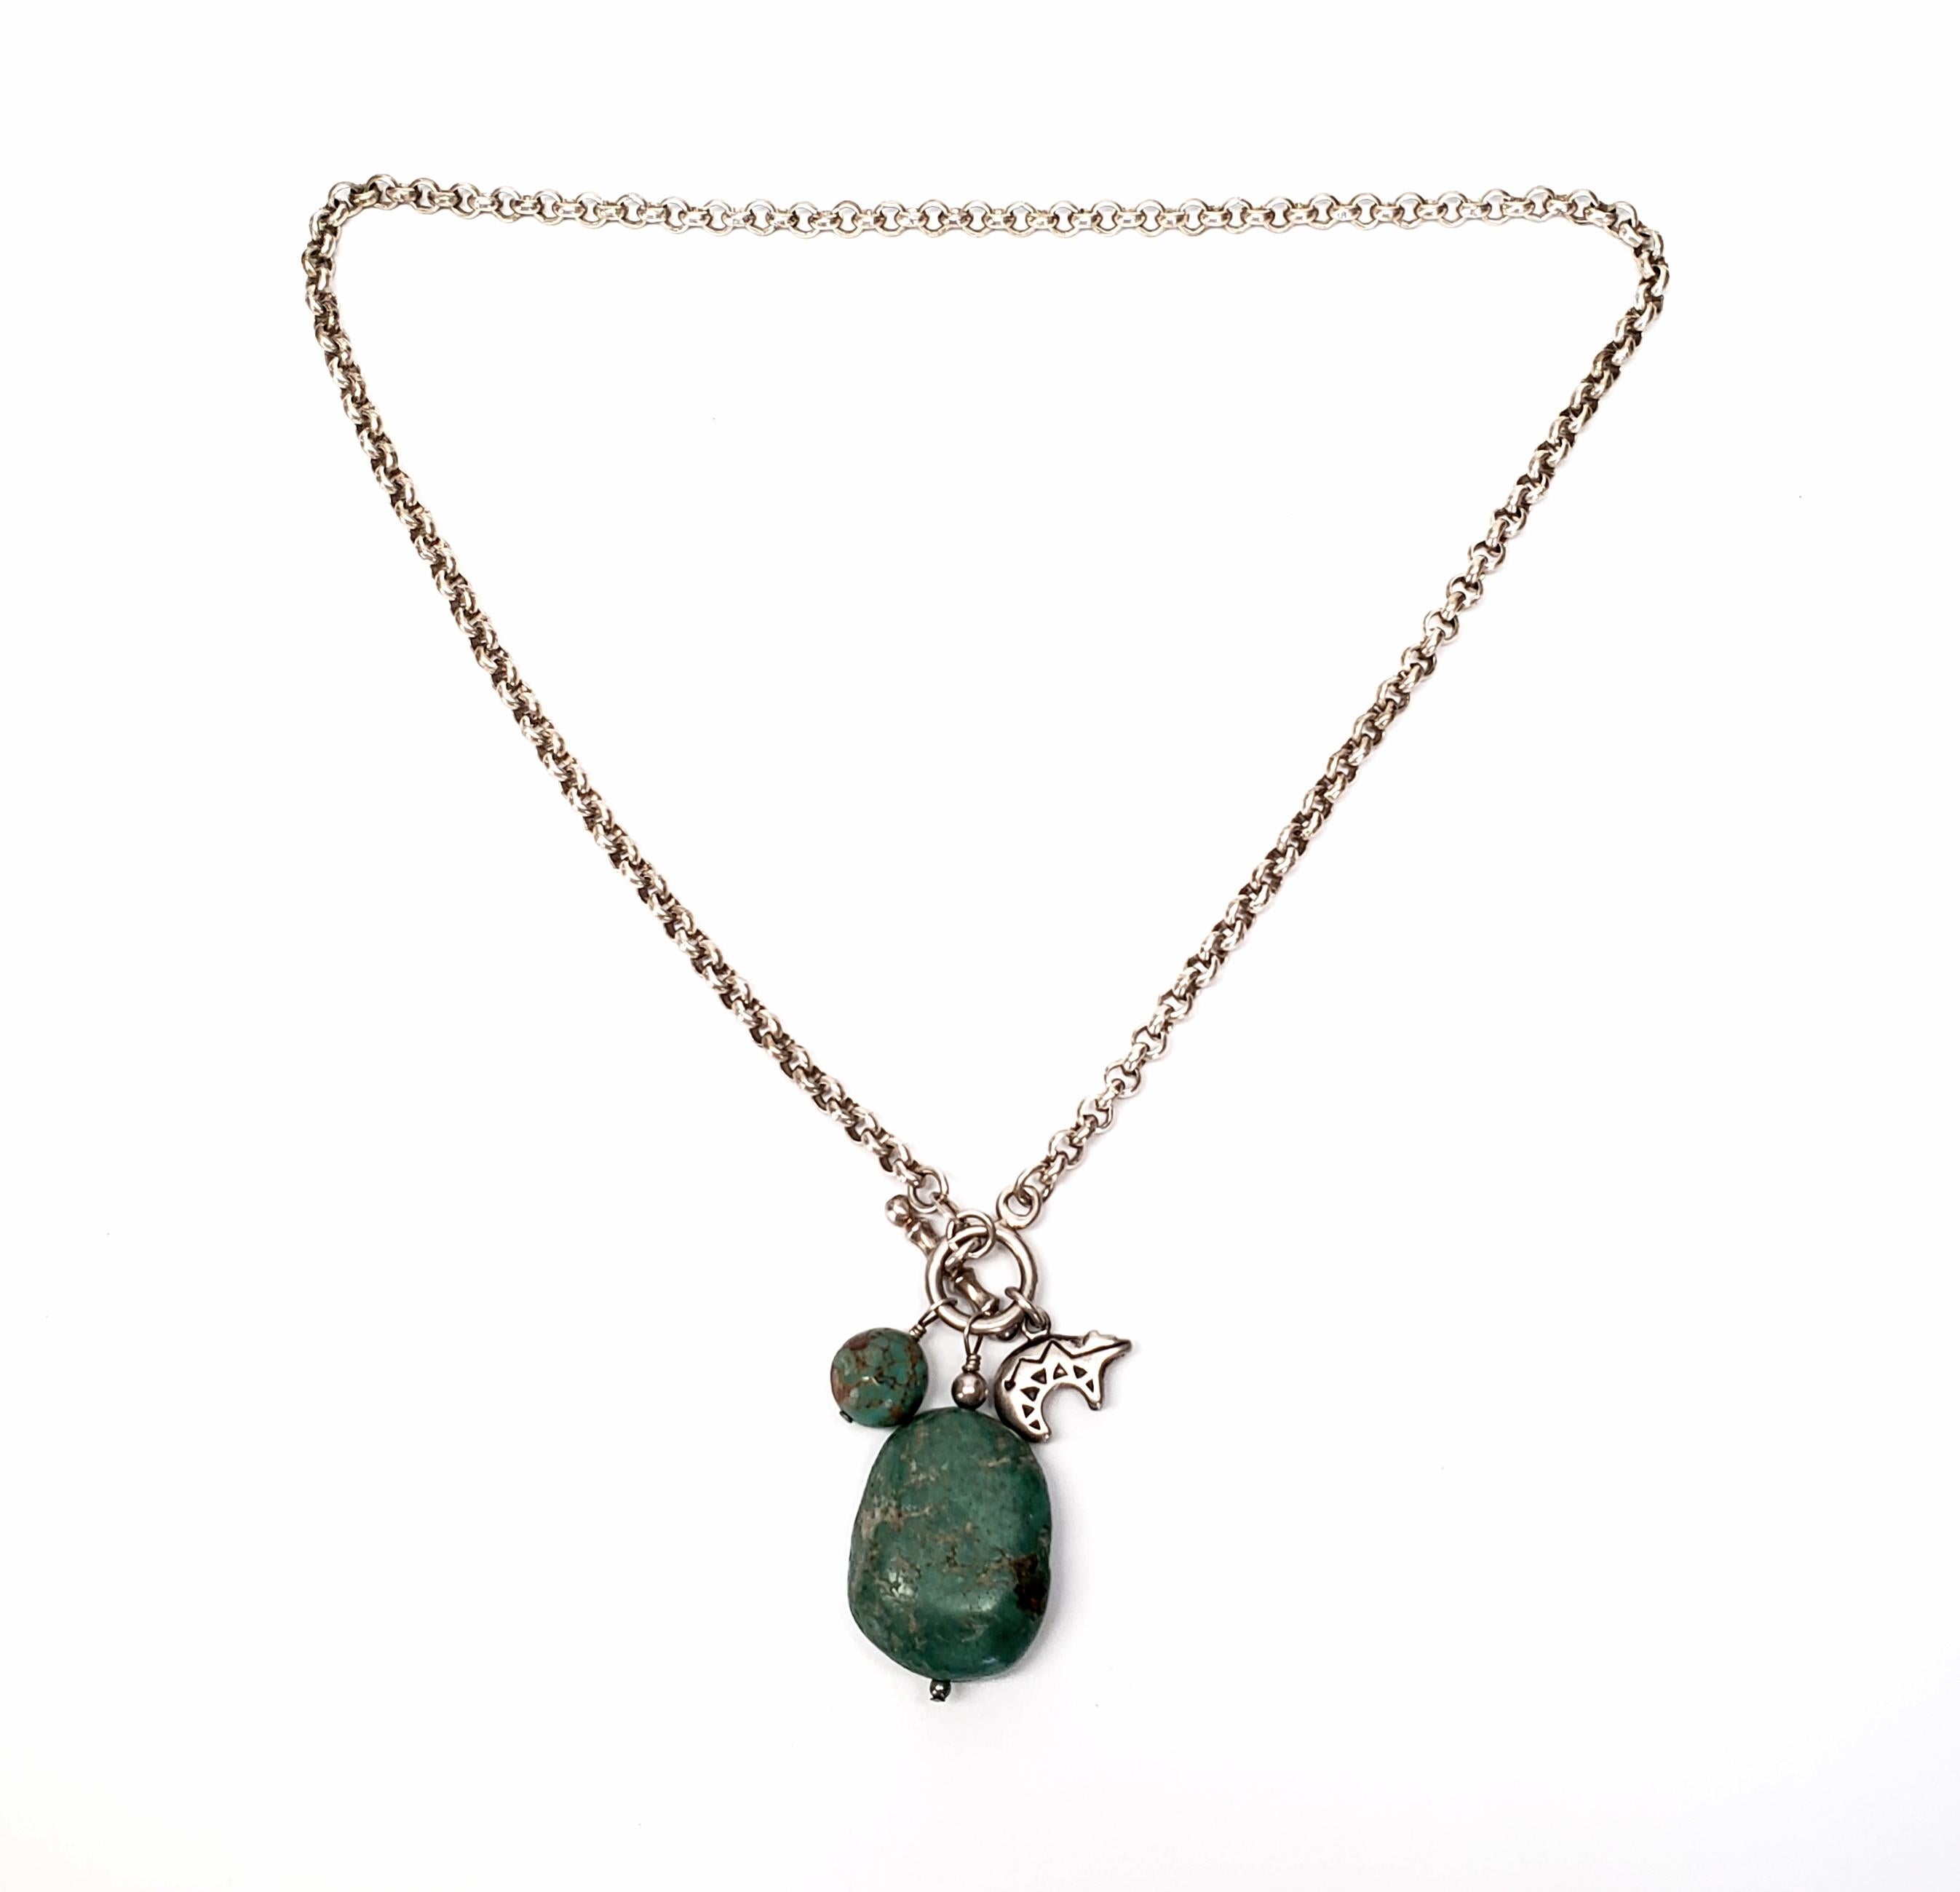 Native American sterling silver and turquoise nugget necklace with small bear charm.

Circle link chain necklace with green turquoise nugget and bead, and a small etched Native American bear charm. The bear symbolizes a fierce warrior and great